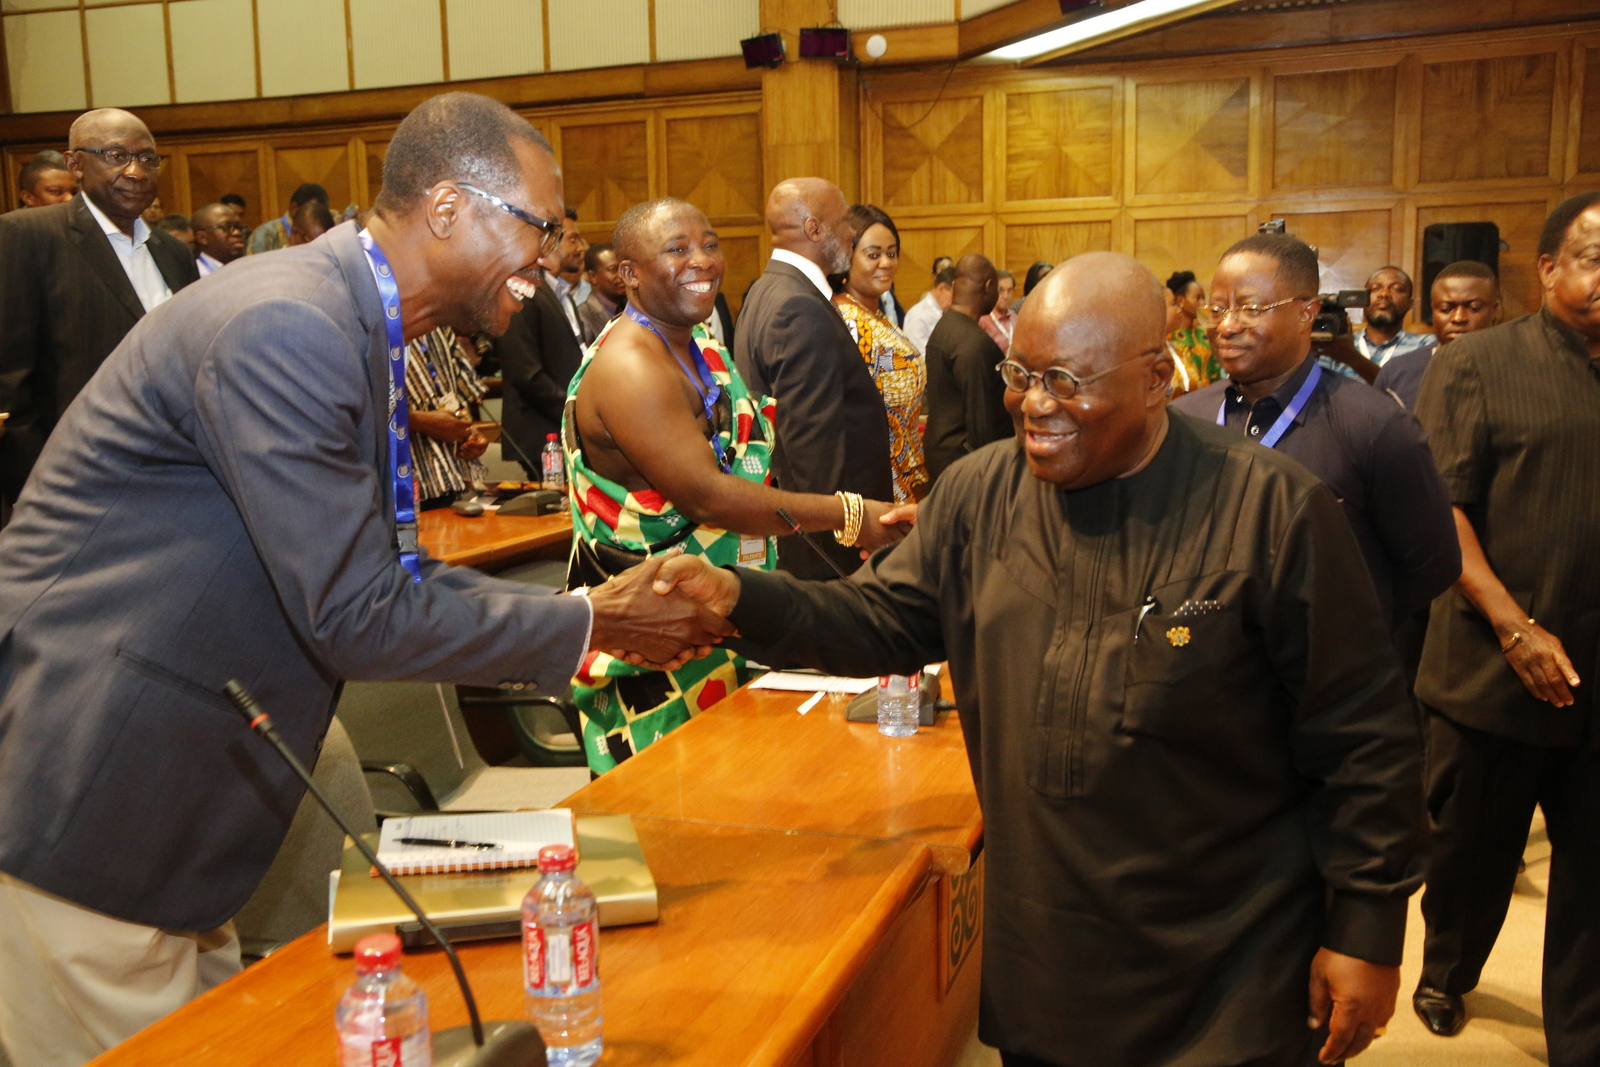 President Akufo-Addo exchanging pleasantries with participants at the conference